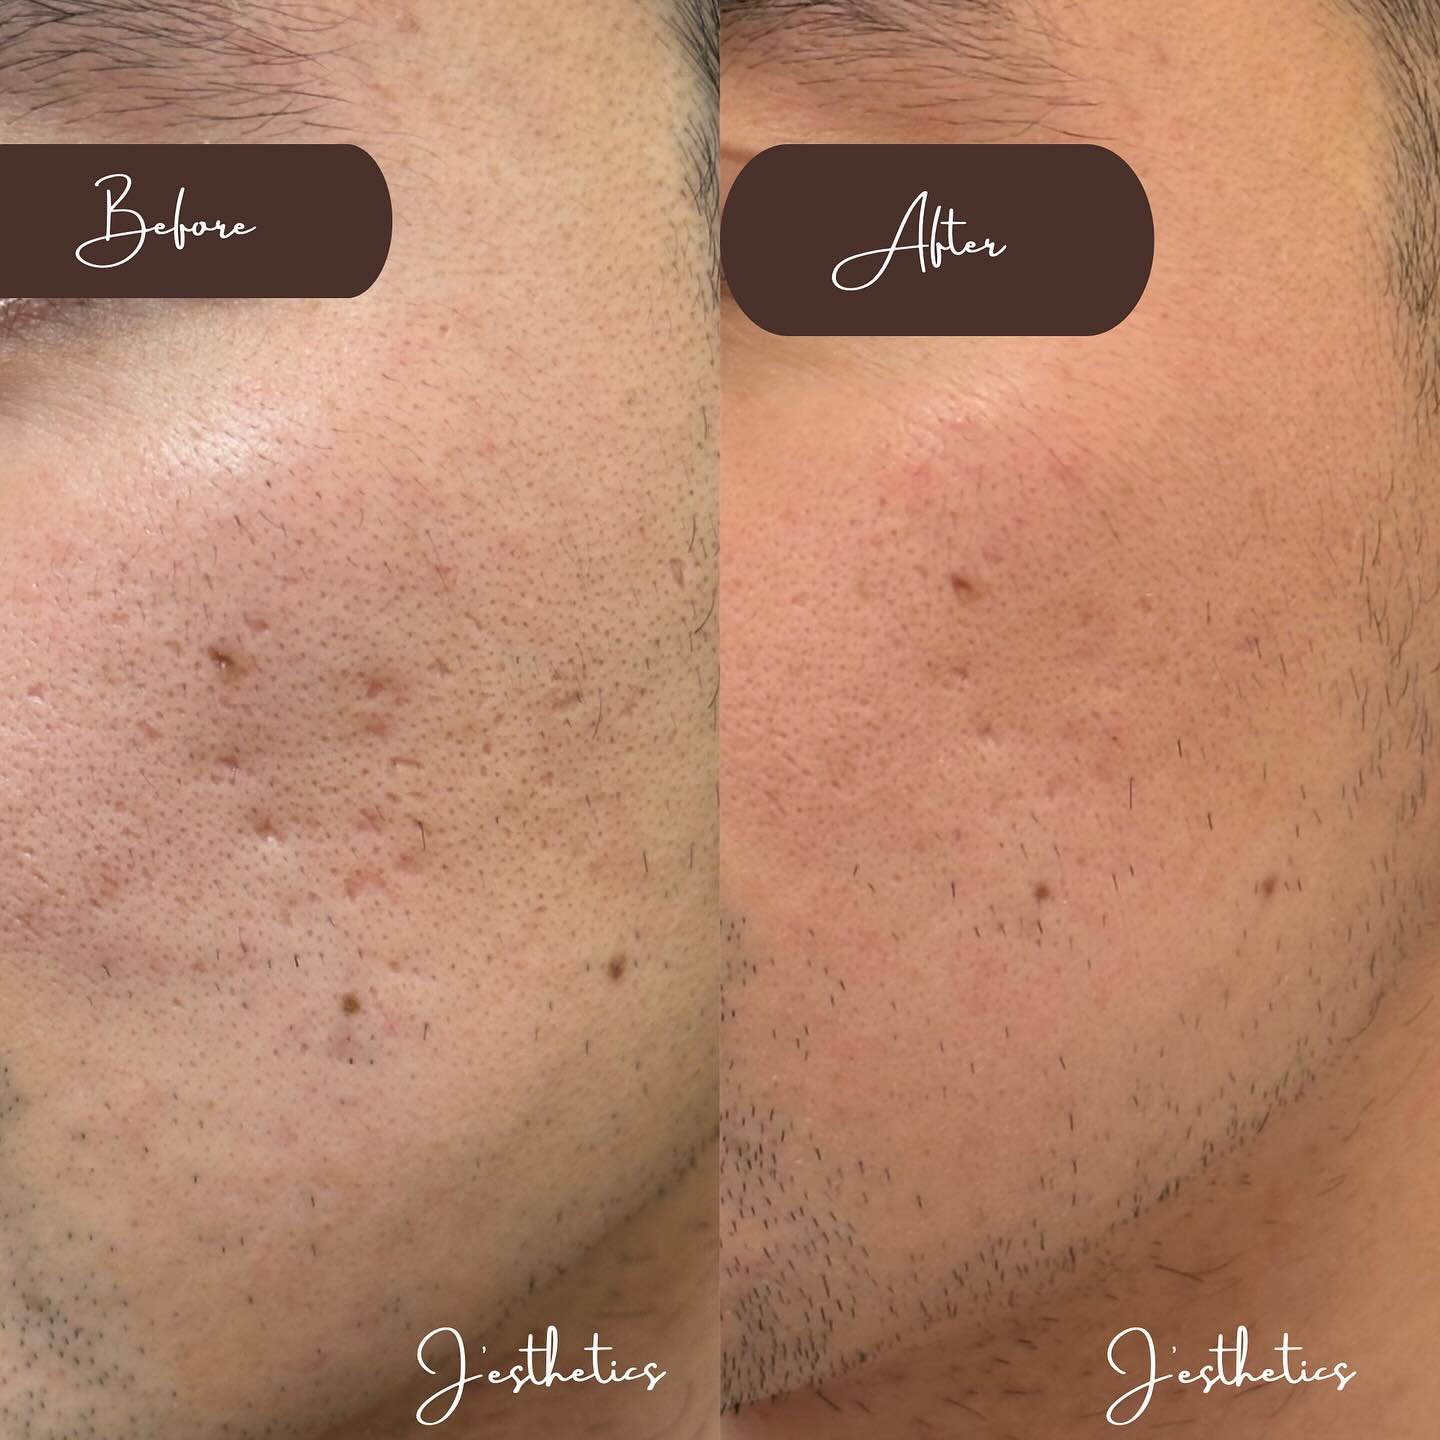 ✨Microneedling✨
Got acne scars? Large pores? Microneedling might be the solution for you! Book your free consultation today to explore all our options that fit all your beauty goals💕 

Before photo: before any treatment 
After photo: after 2 rounds 